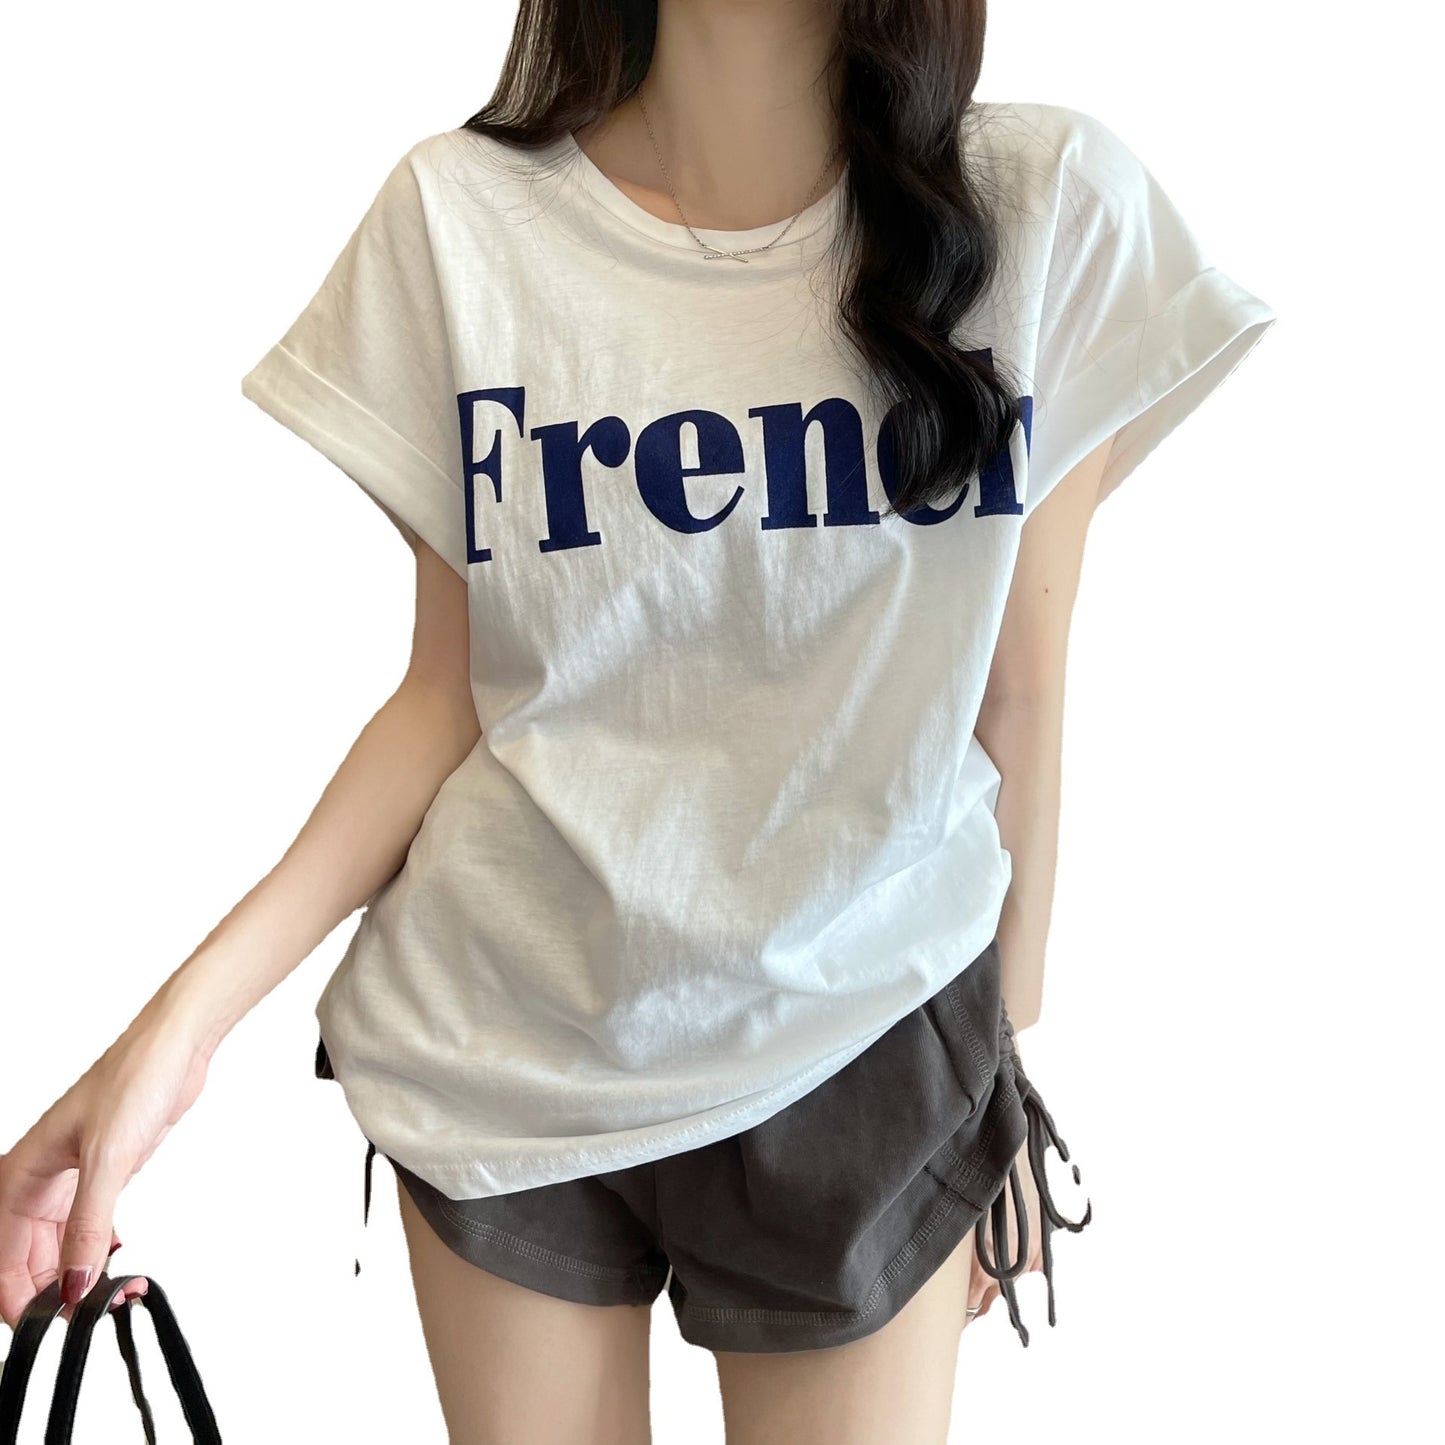 Korean printed "FRENCH" T-Shirt (Shipping not included)